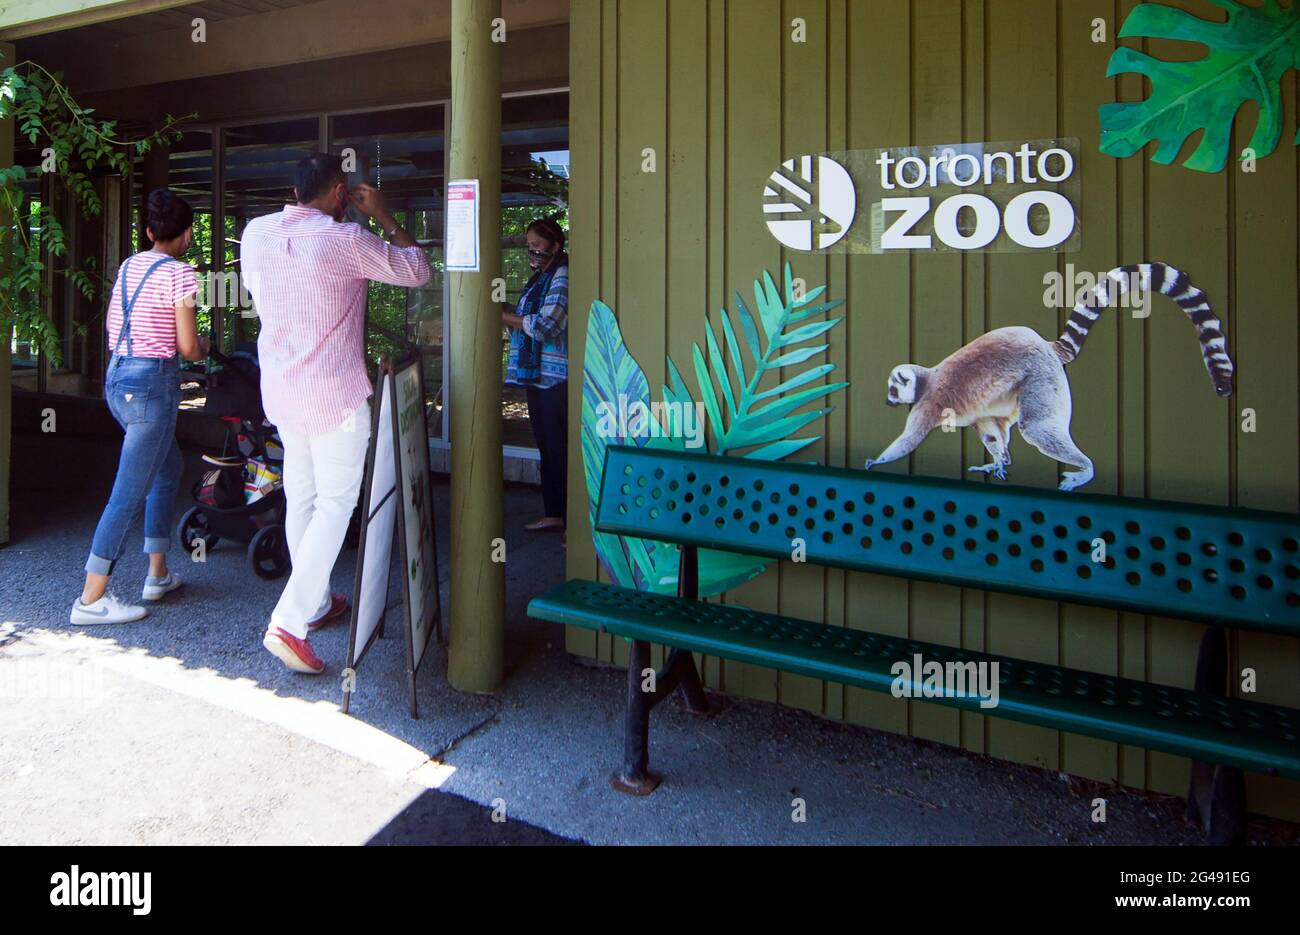 Toronto, June 19. 23rd Nov, 2020. Visitors arrive at the lemur summer home at the Toronto Zoo in Toronto, Canada, on June 19, 2021. The Toronto Zoo officially reopened to the public on Saturday after being closed to visitors since November 23, 2020. Credit: Zou Zheng/Xinhua/Alamy Live News Stock Photo